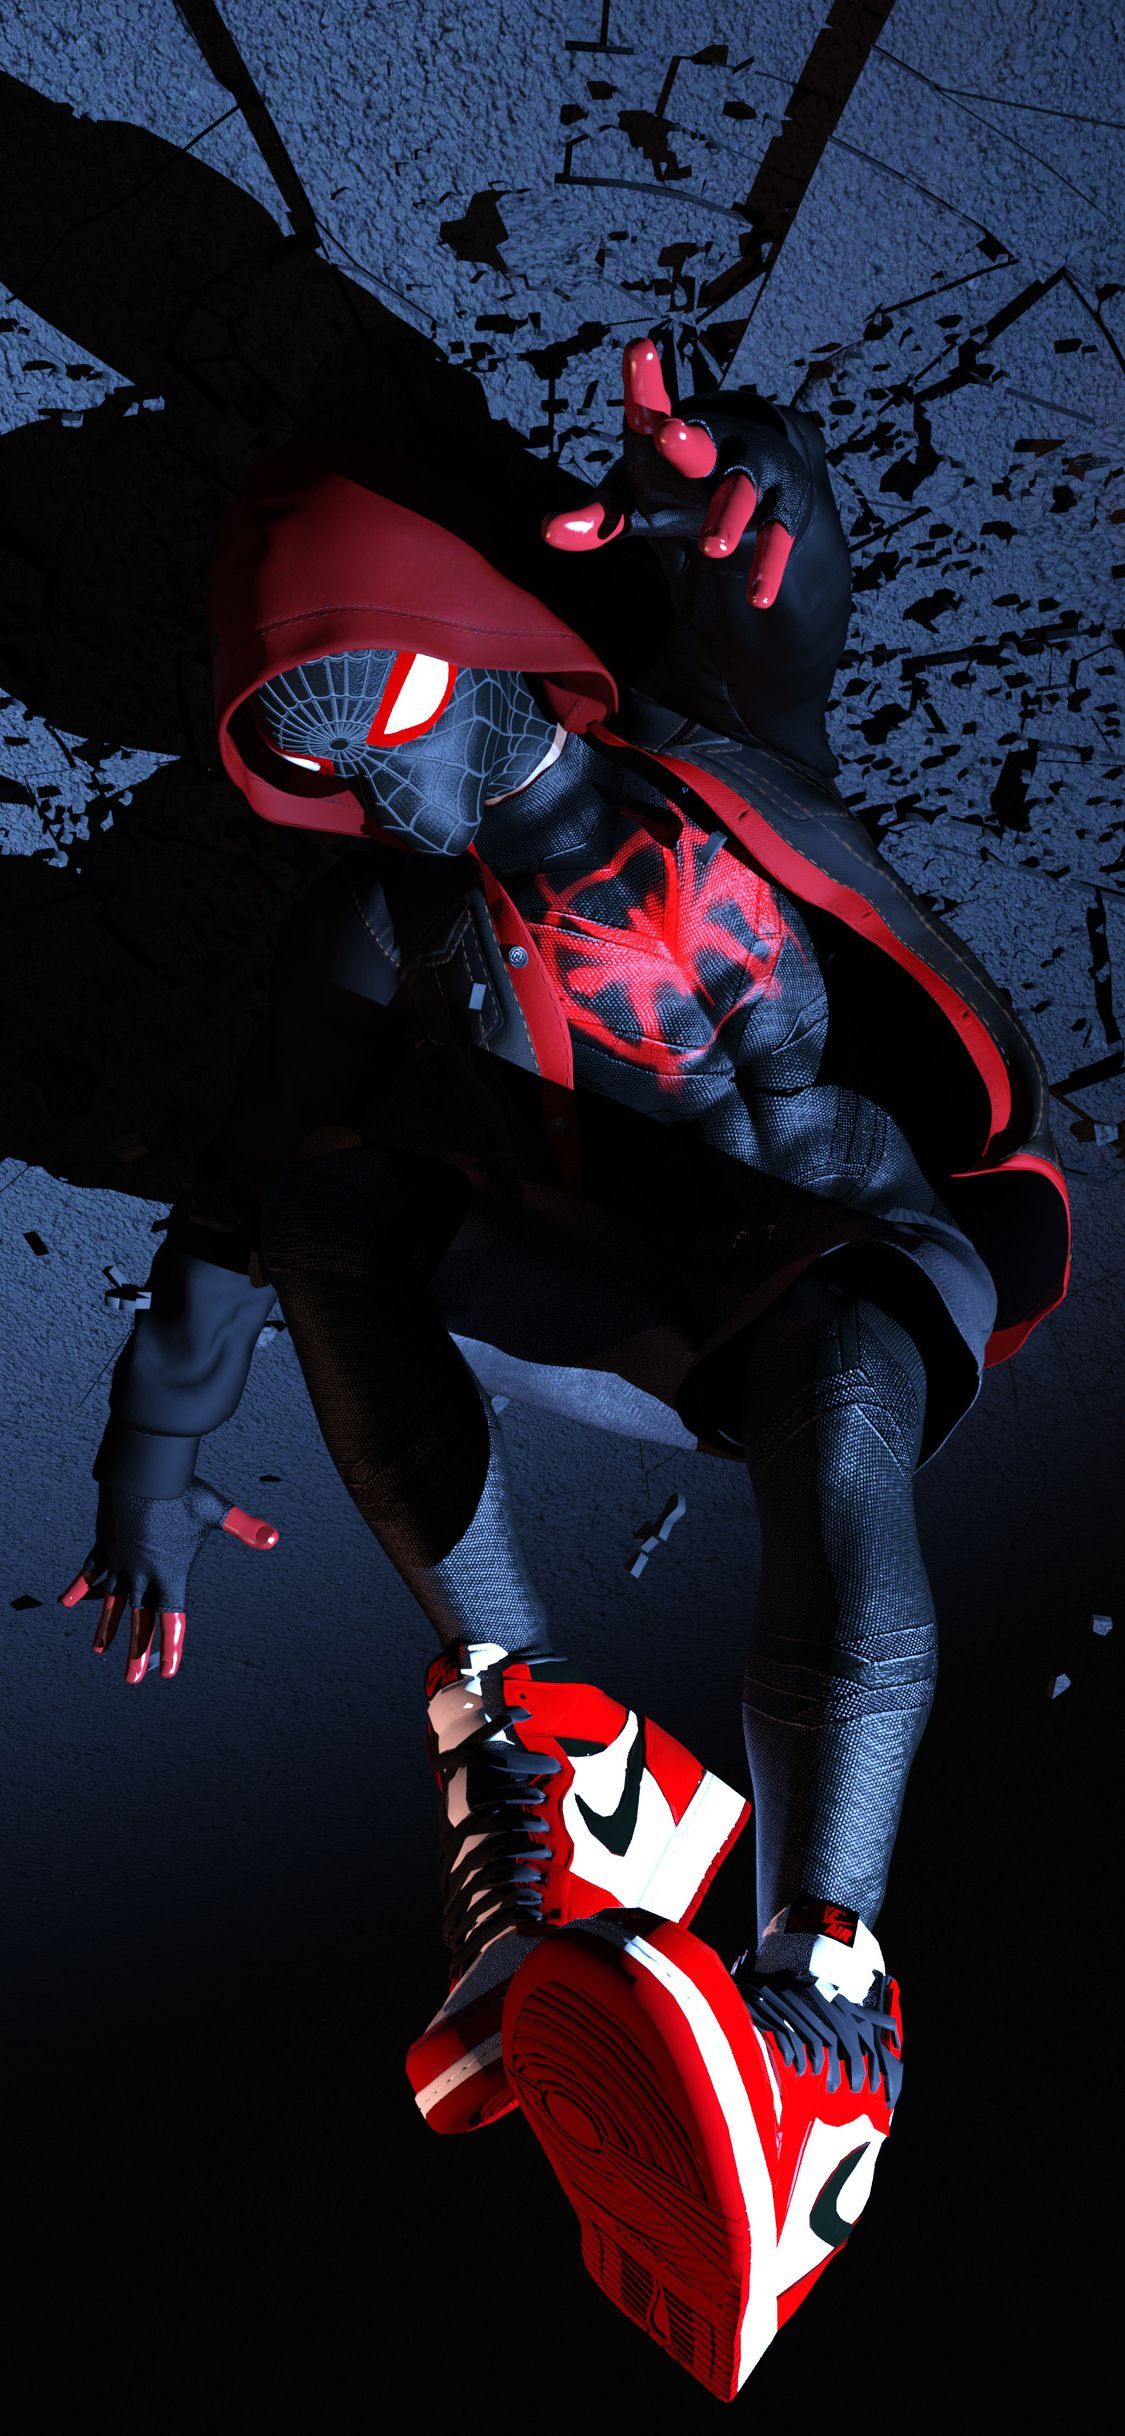 1125x2436 Spiderman Miles Morales 4k Iphone Xs Iphone 10 Iphone X Hd 4k Wallpaper Image Bac Marvel Iphone Wallpaper Marvel Wallpaper Hd Superhero Wallpaper